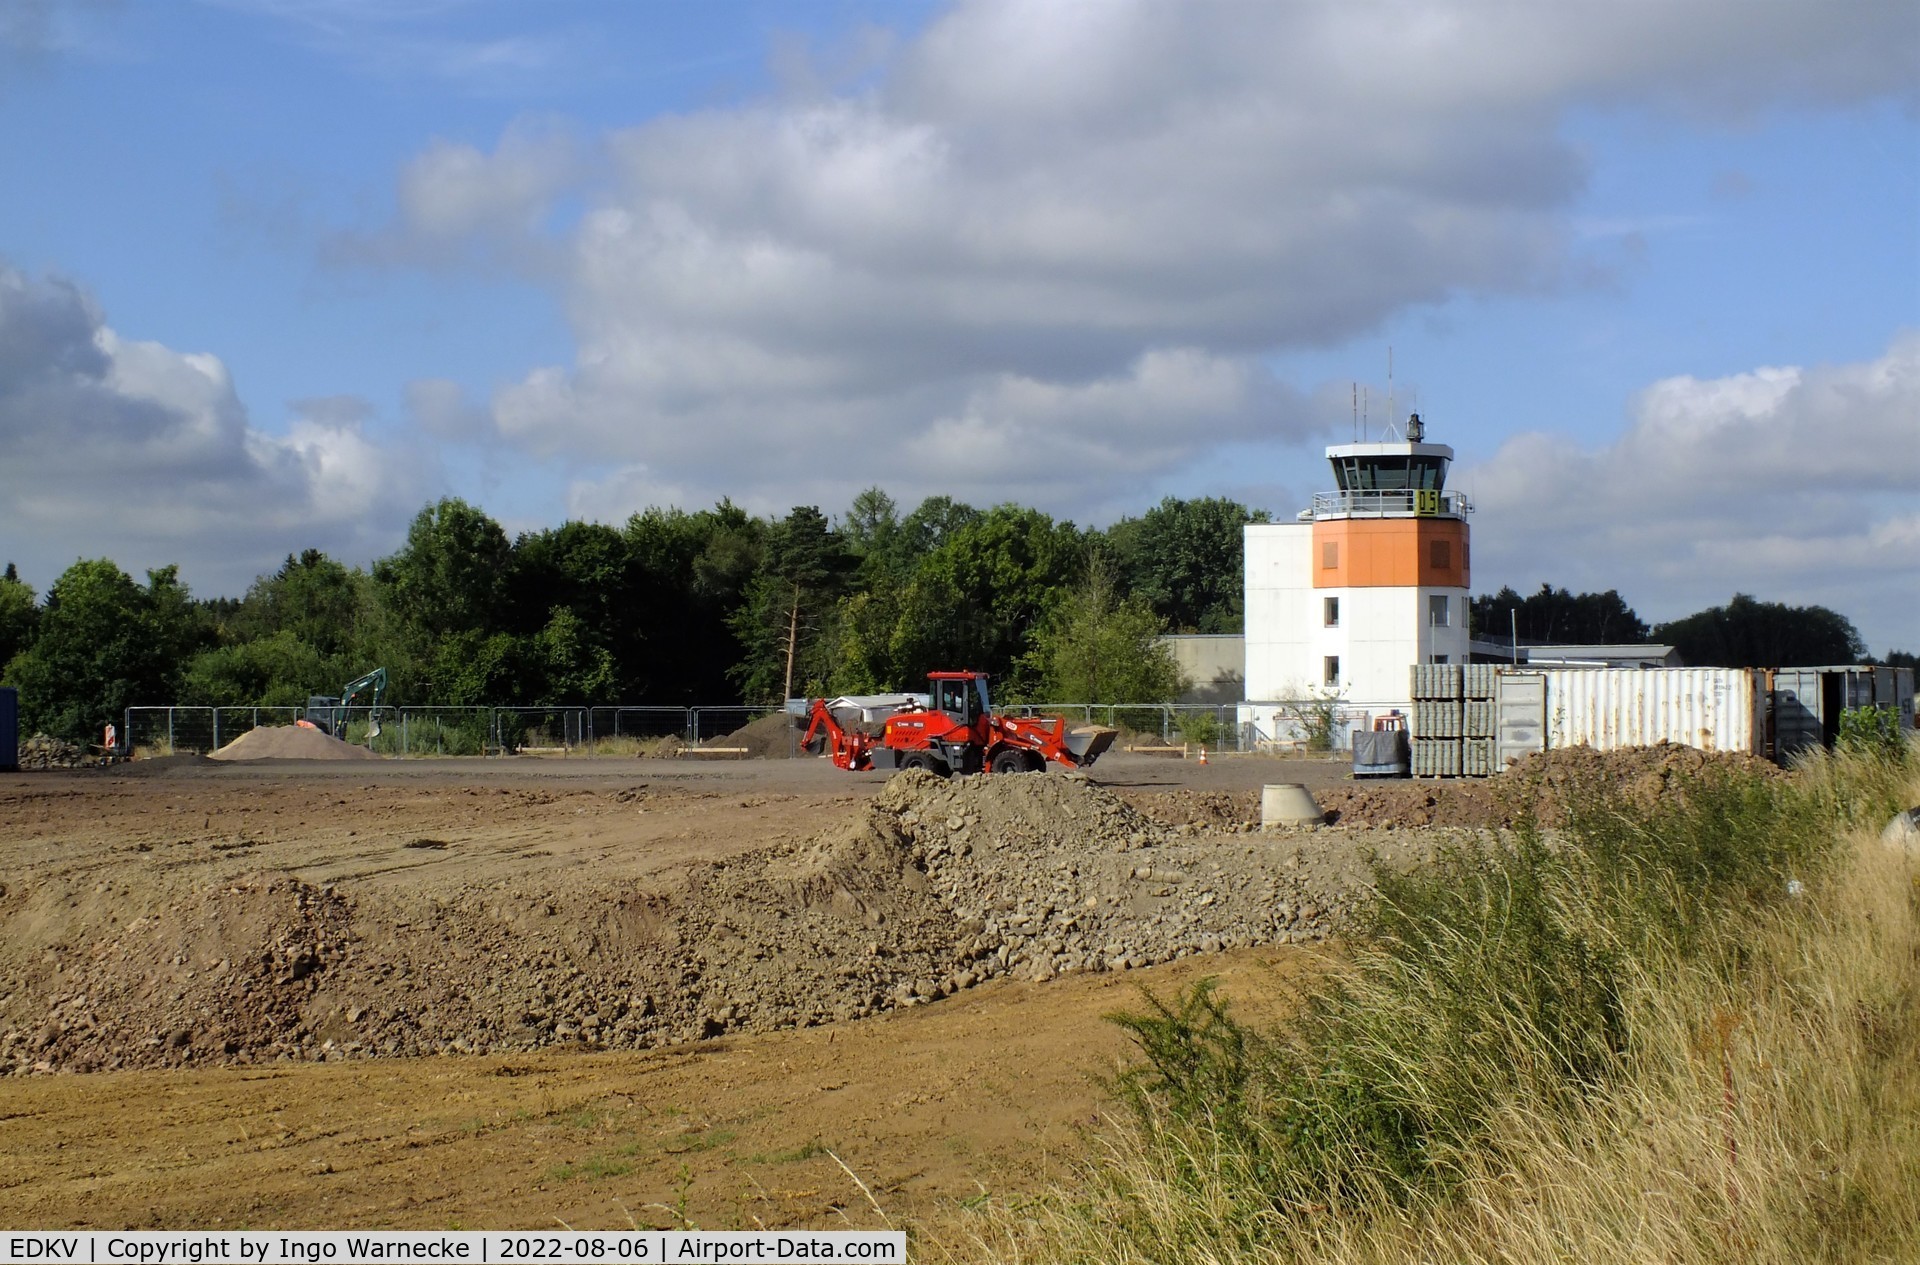 Dahlemer Binz Airport, Dahlem Germany (EDKV) - construction site (new hangars) and tower at Dahlemer Binz airfield